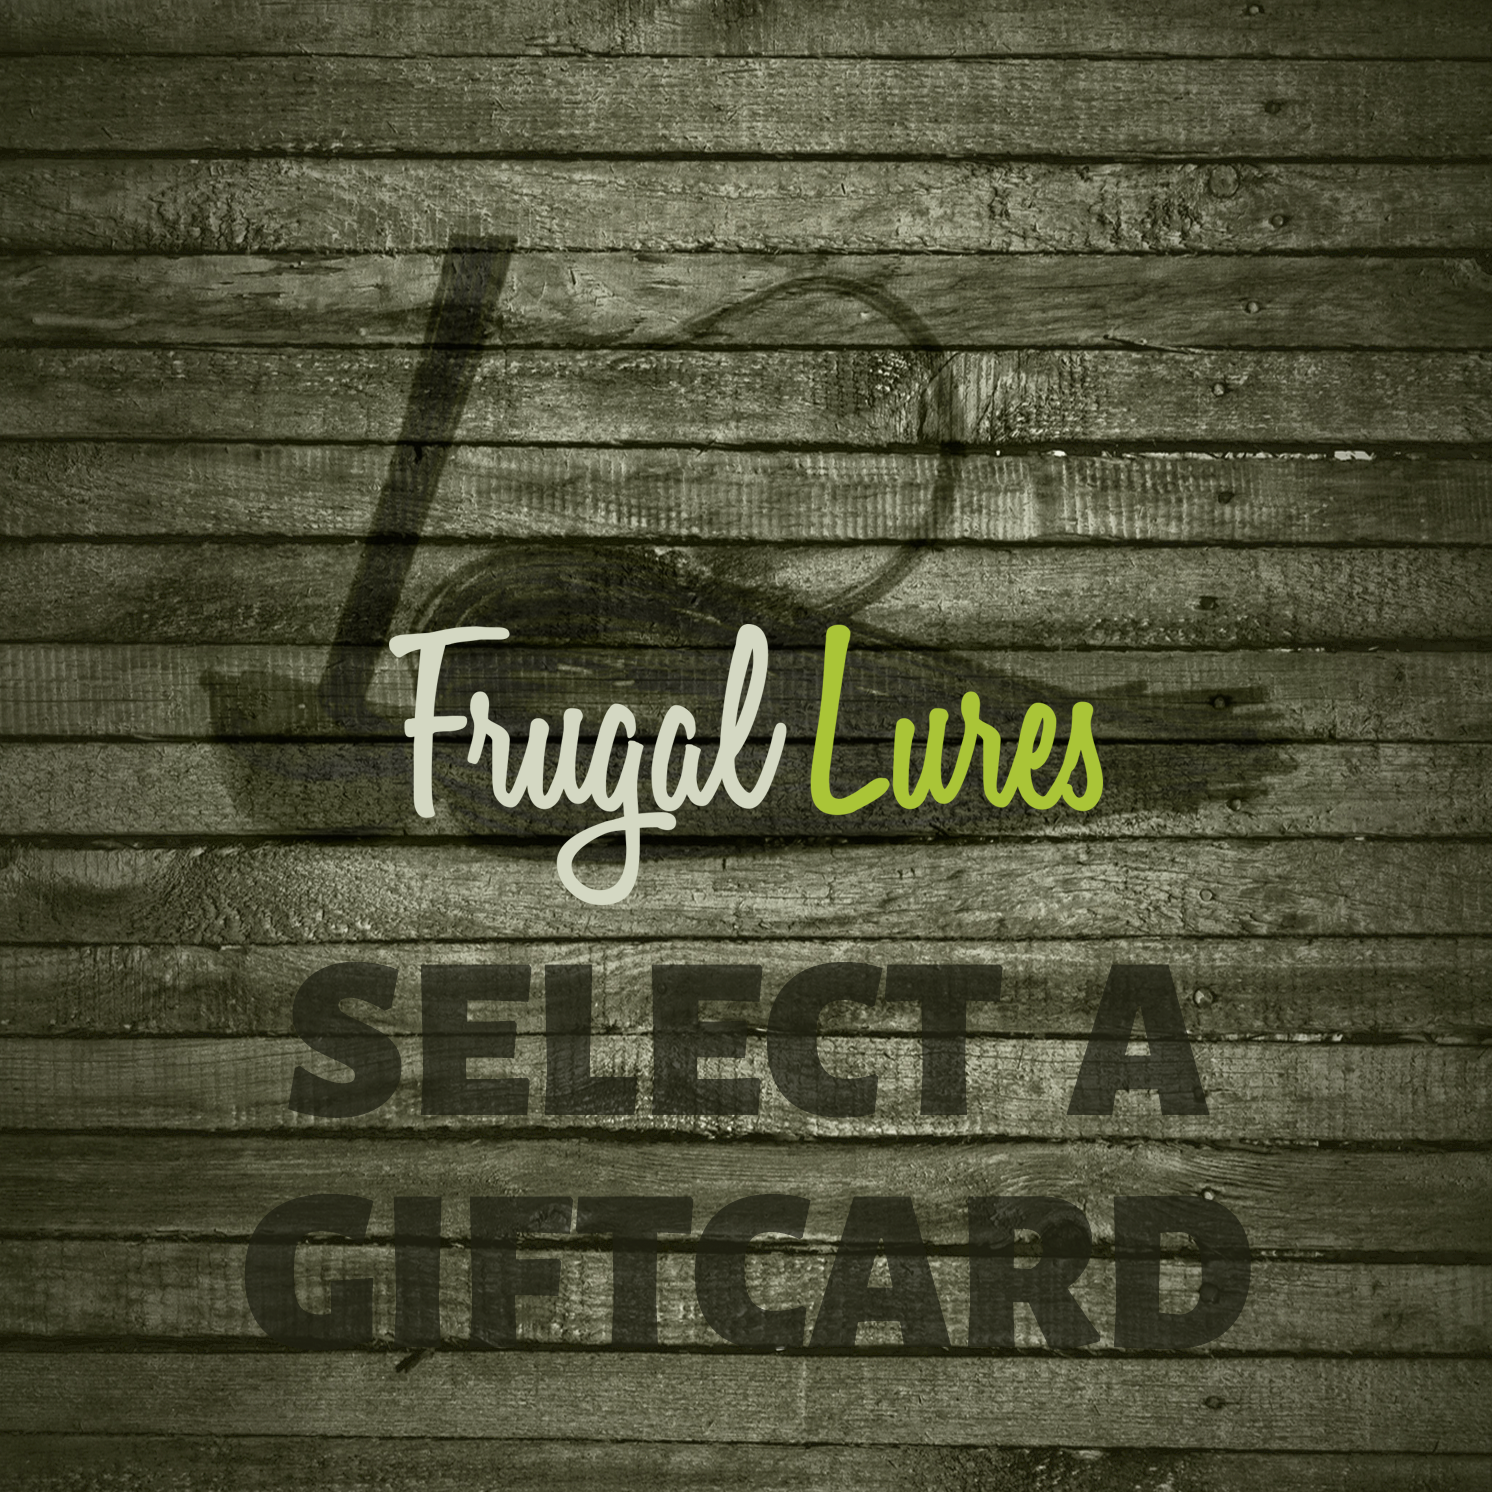 Gift Cards for Fishing Jigs & Fishing Lures